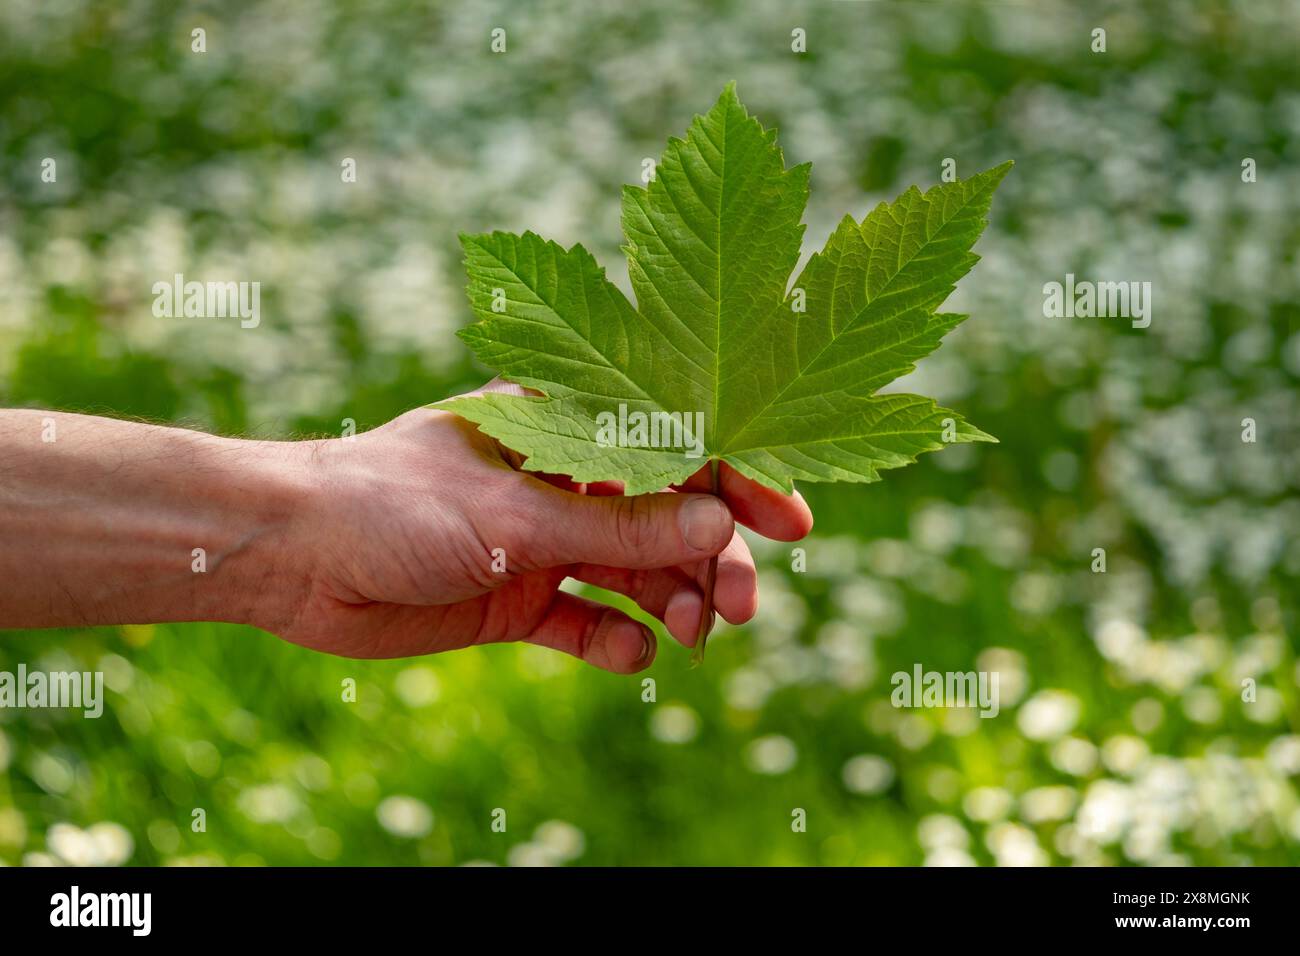 male hand holding green leaf wood, connection between nature and heart health, Cardiac care, Eco-friendly living Stock Photo